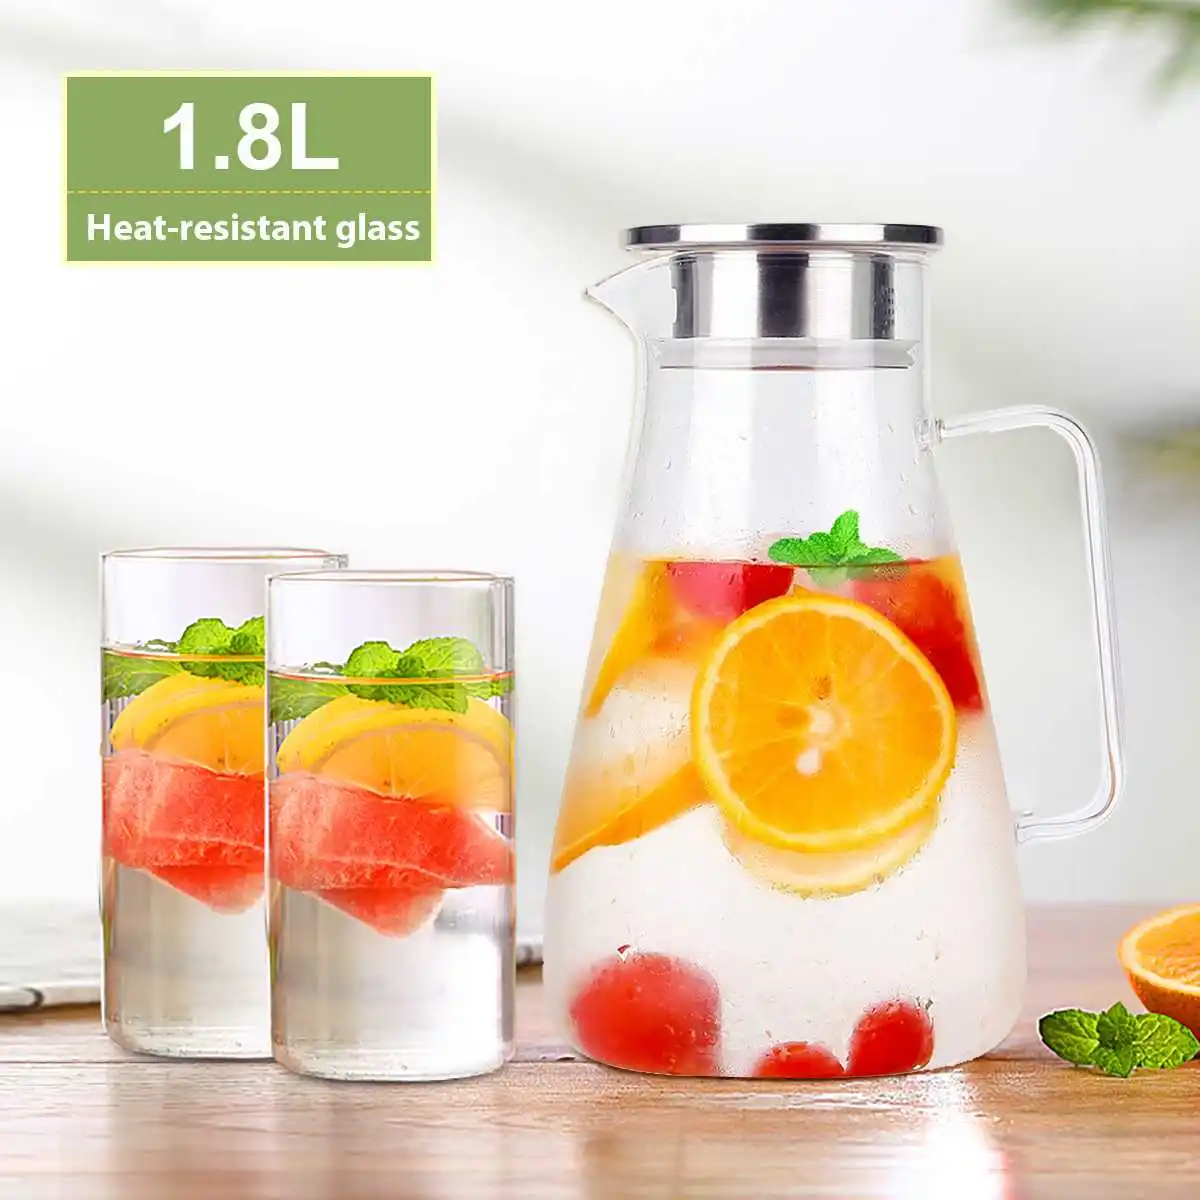 https://ae01.alicdn.com/kf/Hf5187e558642450e884b64d683a1b515m/Heatproof-Glass-Carafe-with-Stainless-Steel-Lid-Hot-or-Iced-Water-Pitcher-1-8L-Water-Pitcher.jpg